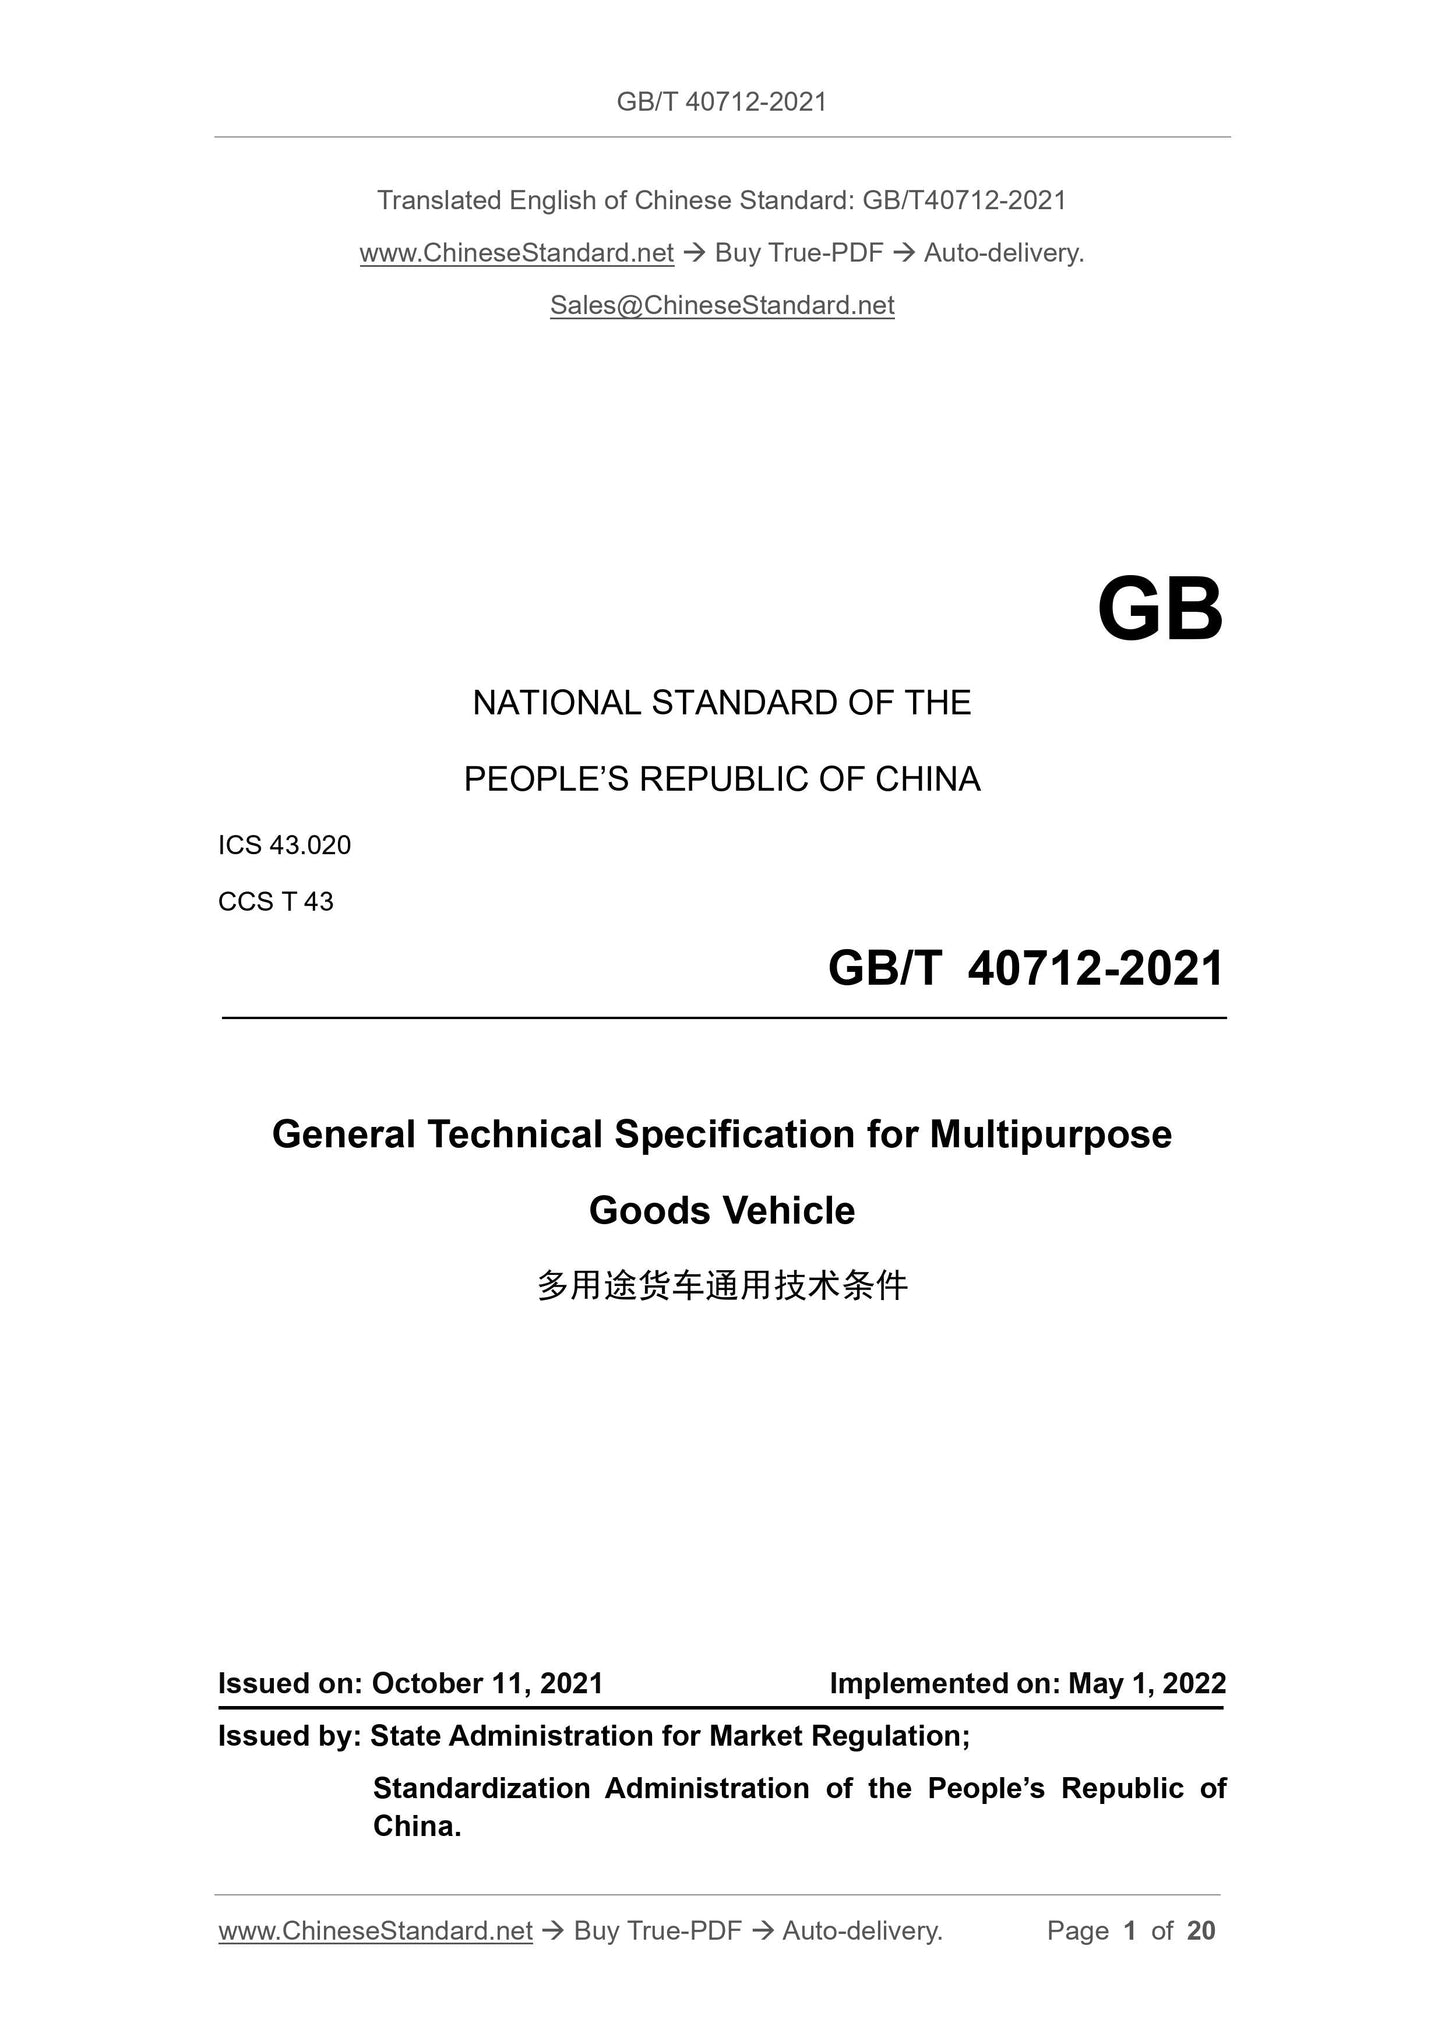 GB/T 40712-2021 Page 1